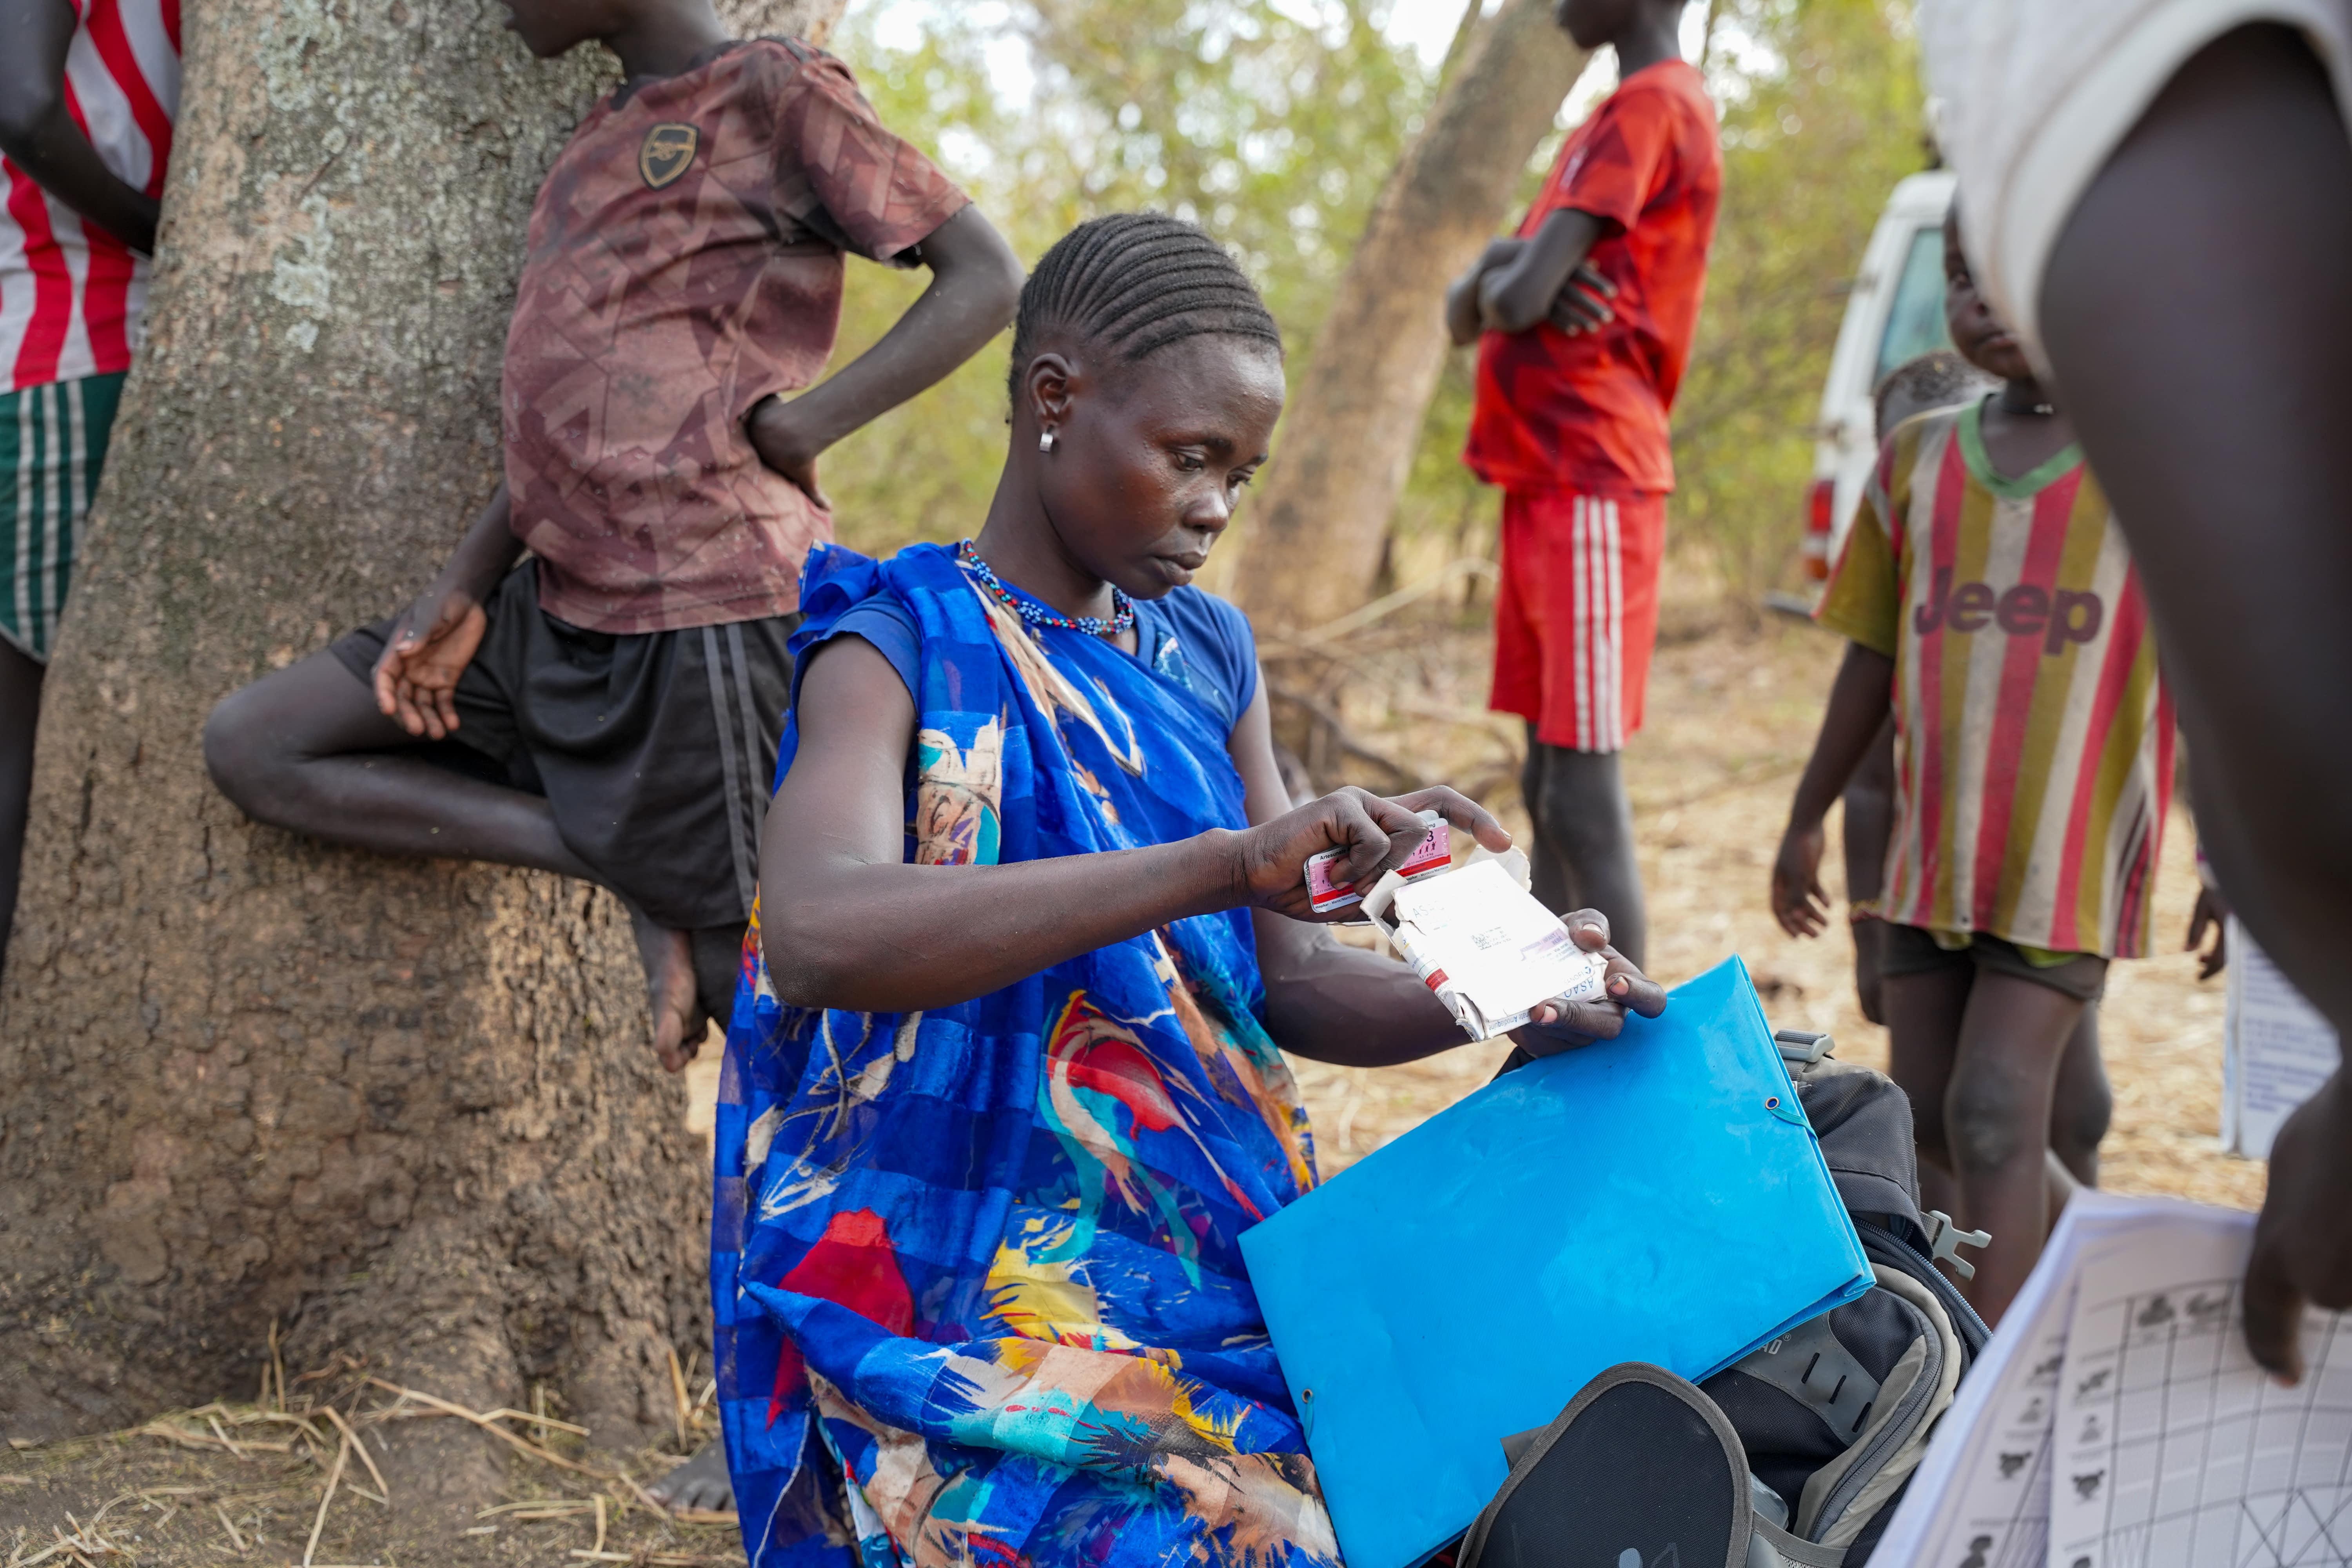 Cattle Keepers in South Sudan: Nyuruth Longony, community health worker trained by MSF, packs drug supplies during a meeting with an MSF Integrated Community Case Management (ICCM) supervisor visiting her community in Labarab, Greater Pibor Administrative Area.